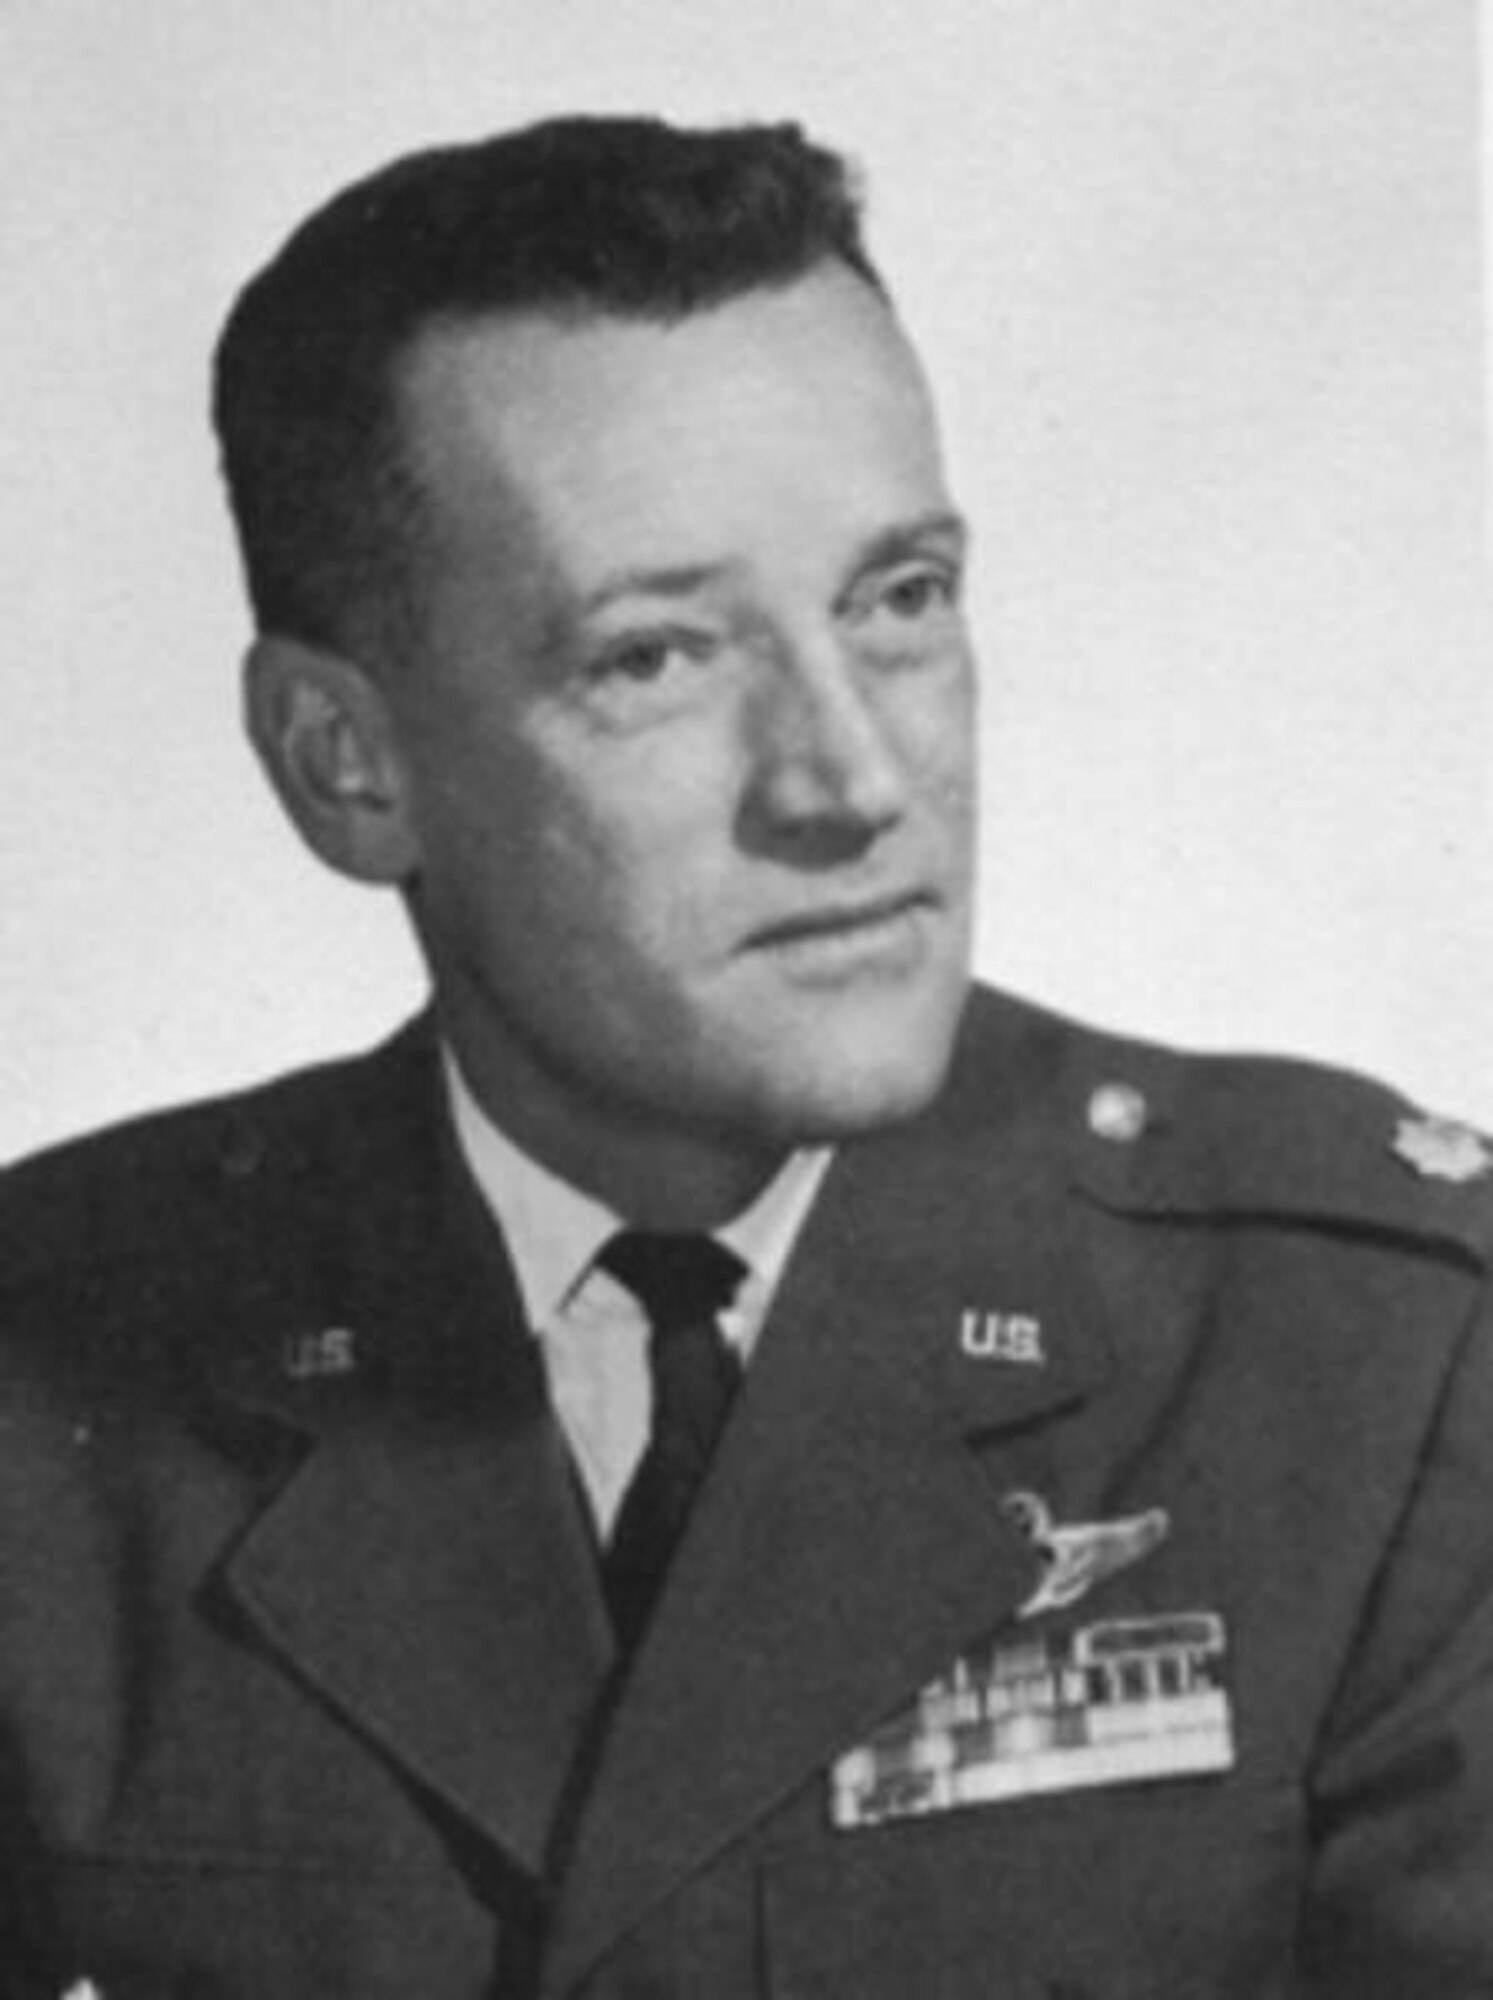 Pictured is Air Force Maj. Kelly Cook, one of the first Air Force Academy professors. He taught AF cadets English from 1959 to 1963 and was later declared killed in action, body not recovered, leaving behind a wife and six children, including Maureen Kozak, the wife of Col. Raymond A. Kozak, the 512th Airlift Wing commander at Dover Air Force Base, Del. (Submitted photo) 